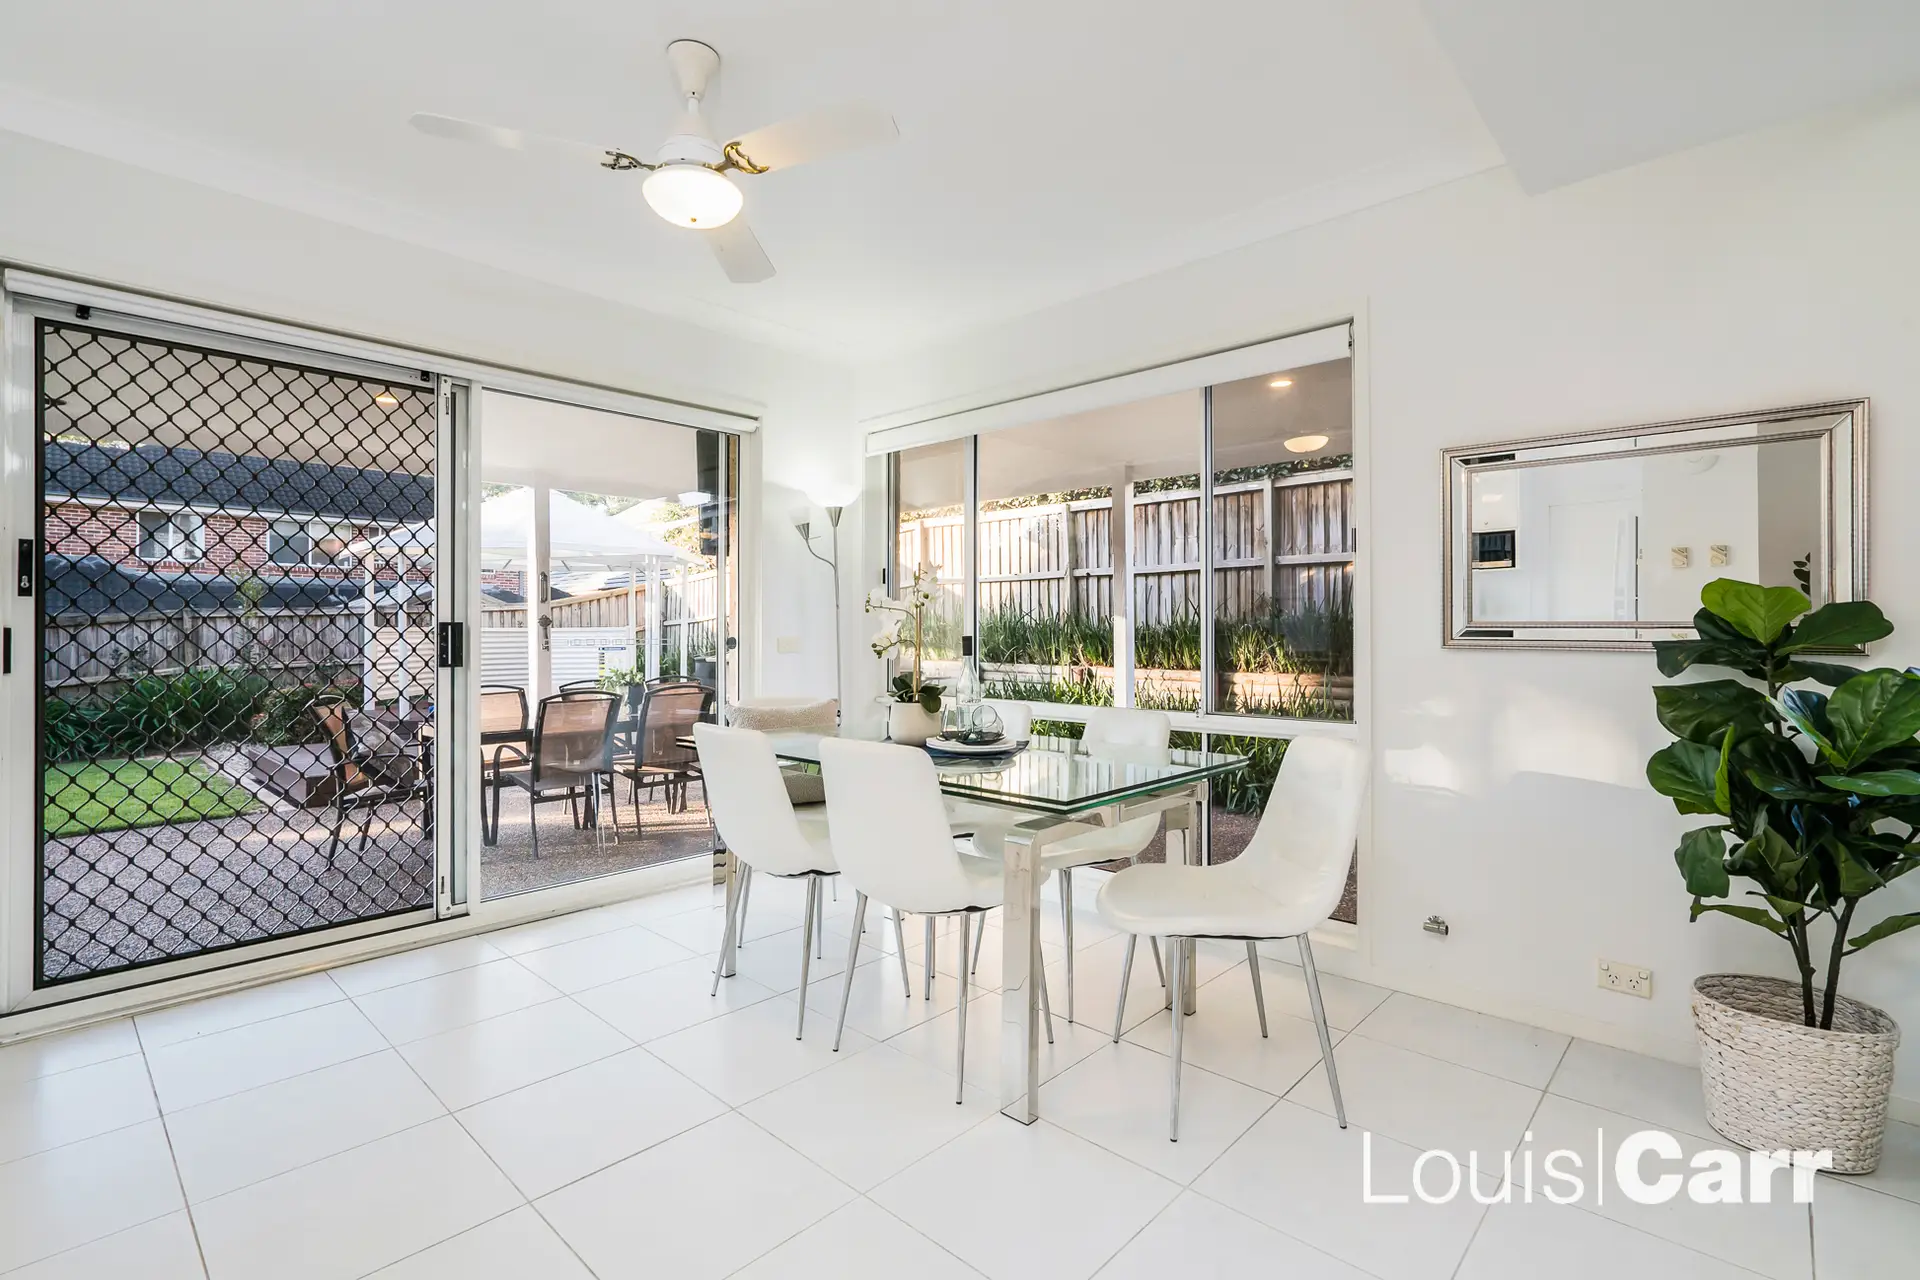 Photo #7: 3 Folkestone Place, Dural - Sold by Louis Carr Real Estate